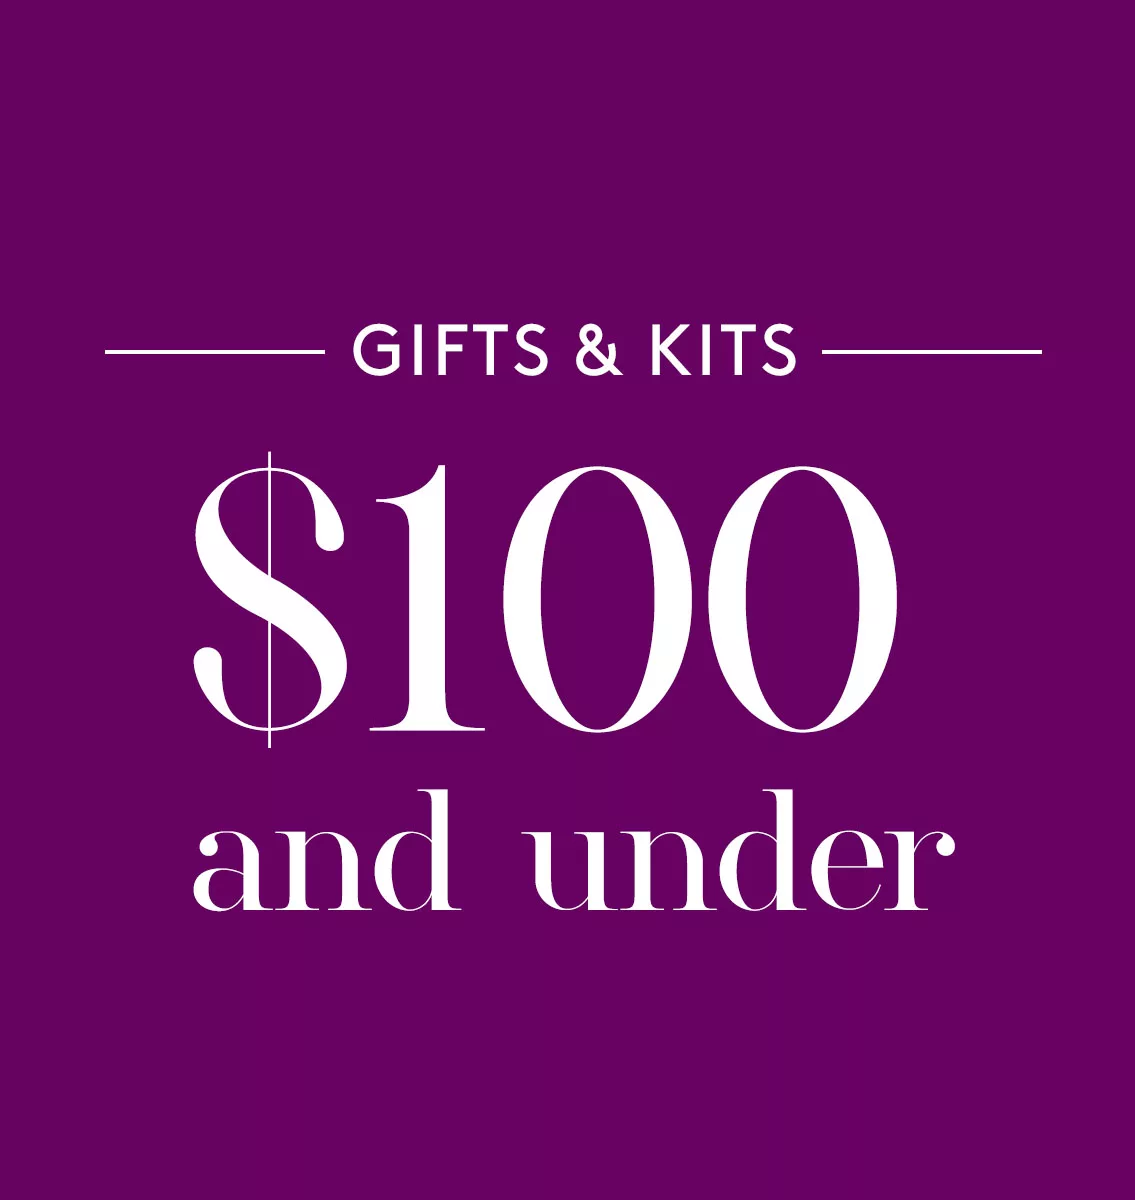 Gifts for $100 and Under